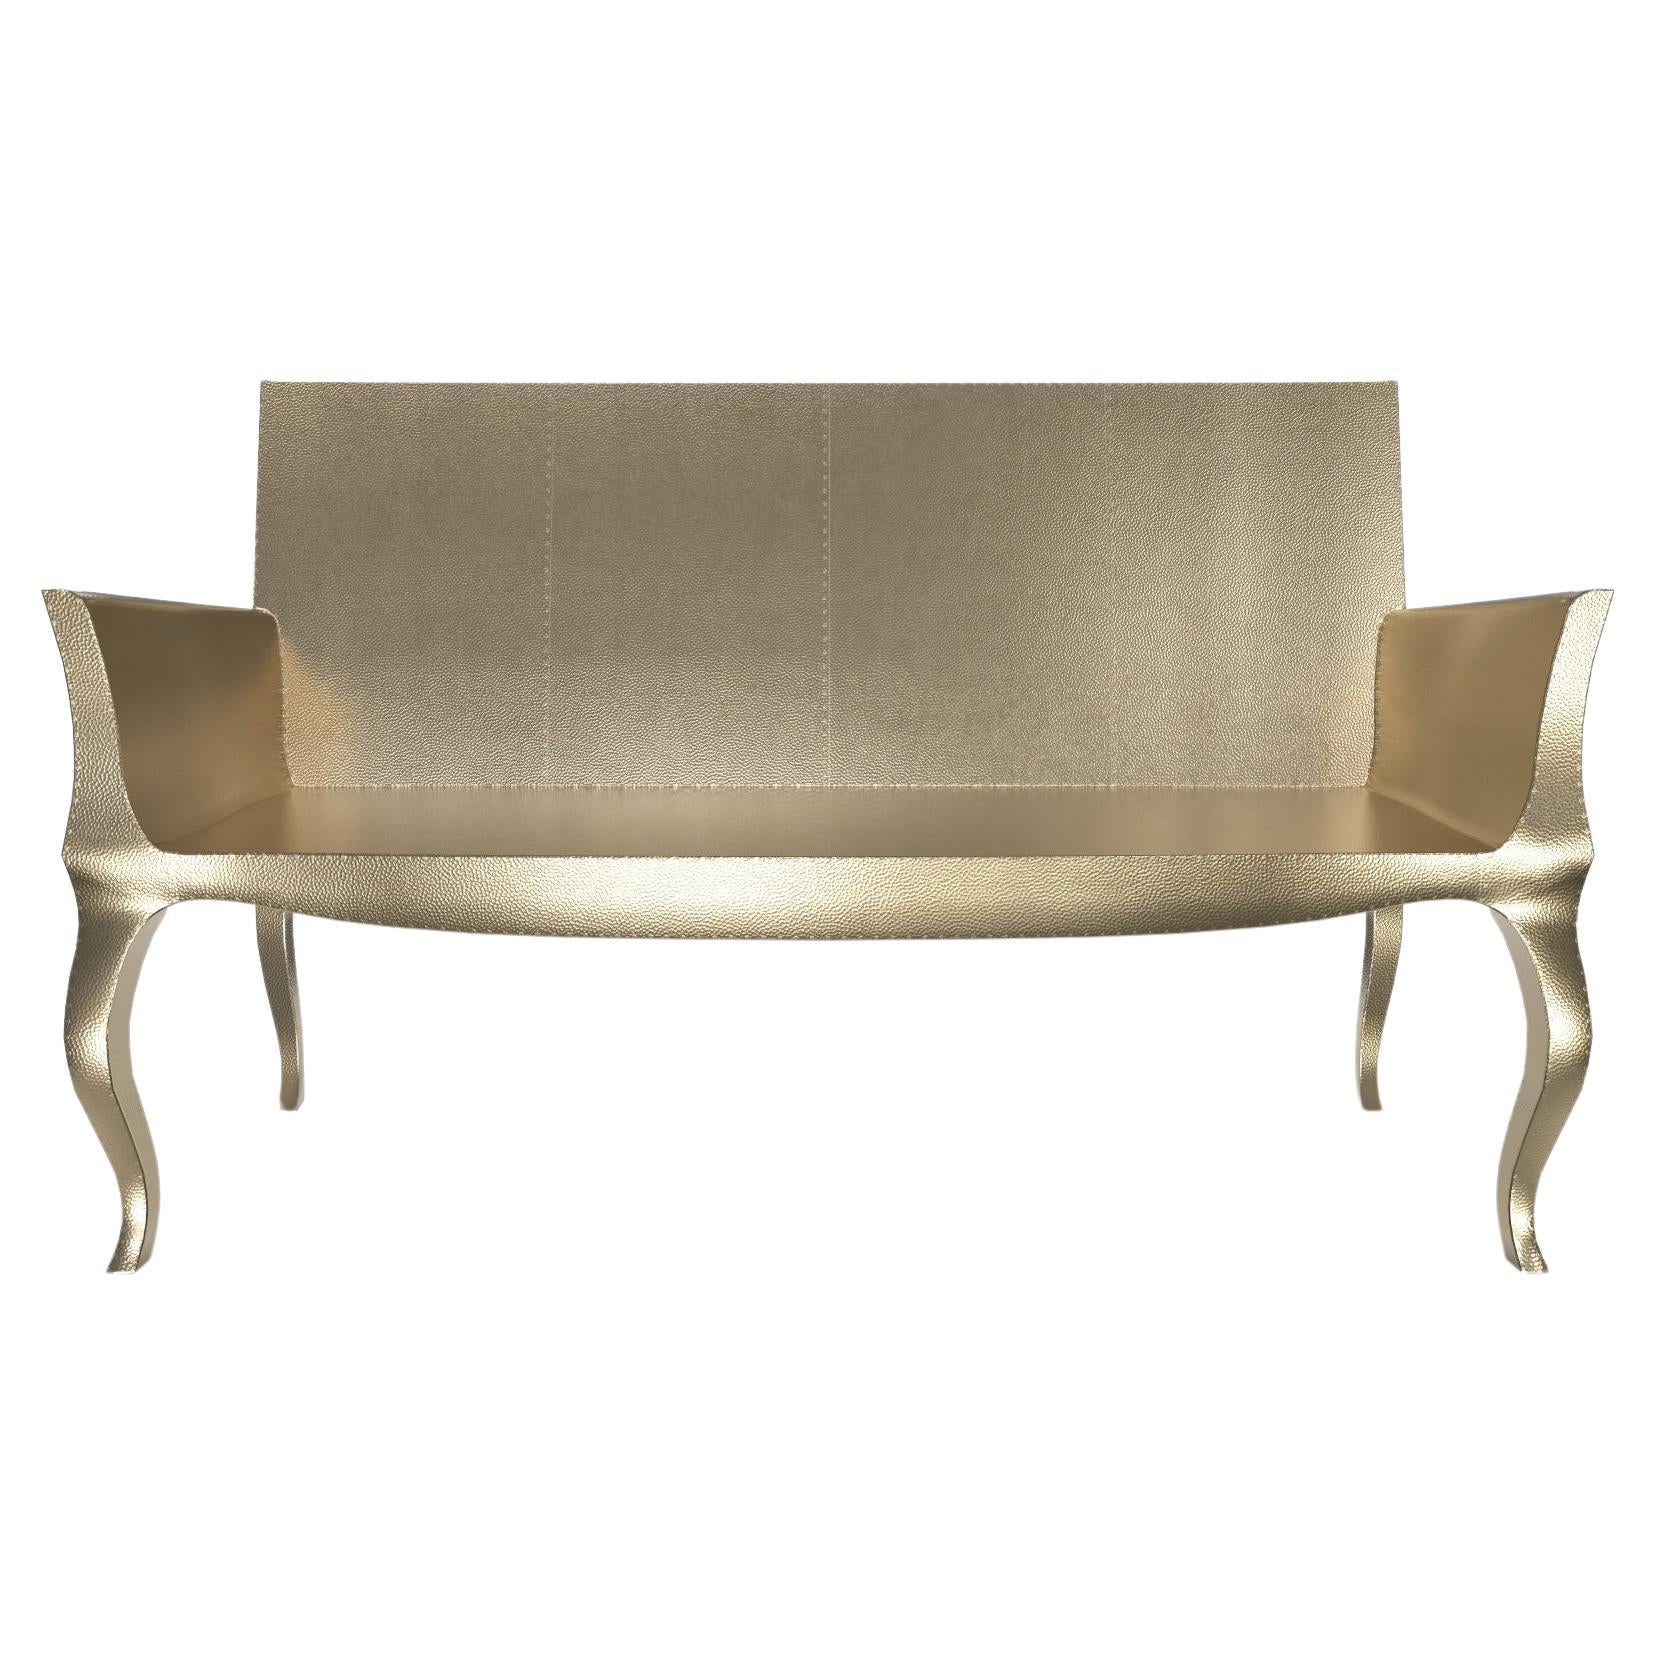 Louise Settee Art Deco Living Room Sets in Mid. Hammered Brass by Paul Mathieu For Sale